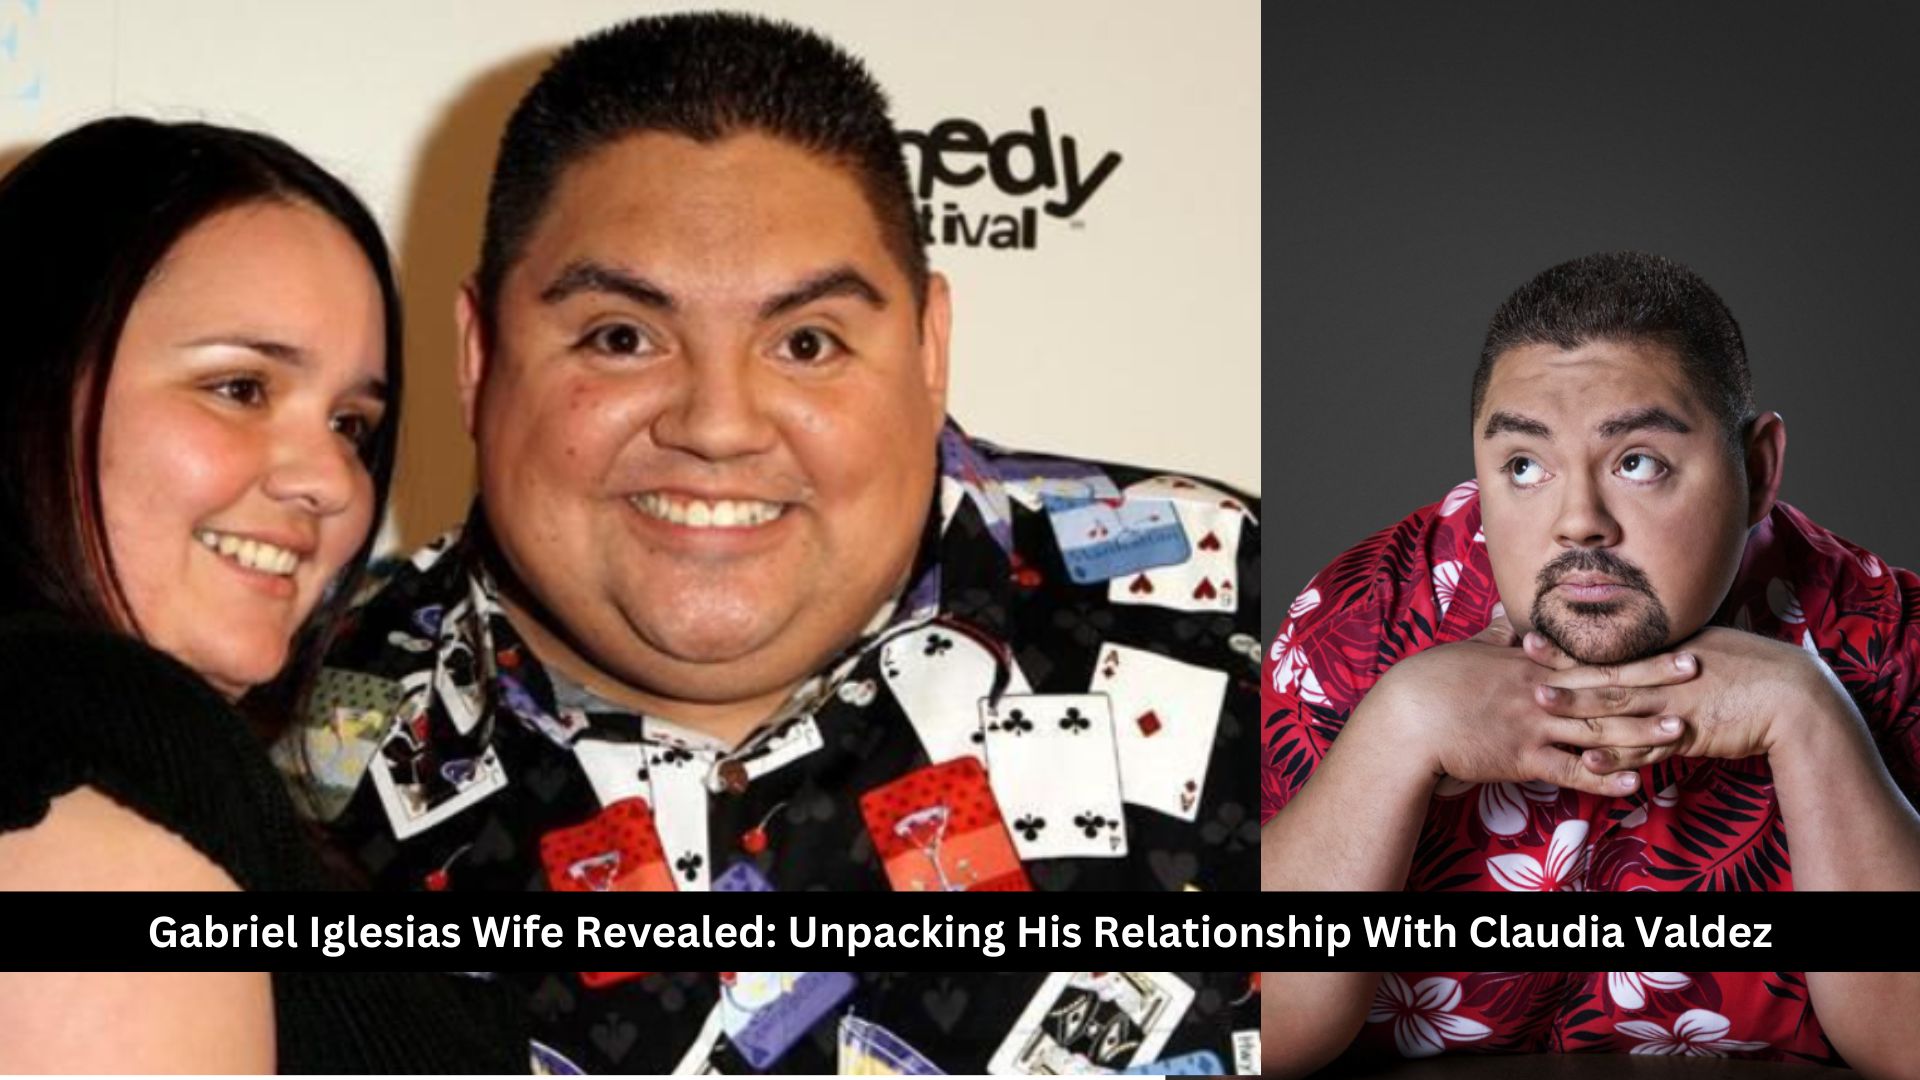 Gabriel Iglesias Wife Revealed: Unpacking His Relationship With Claudia Valdez